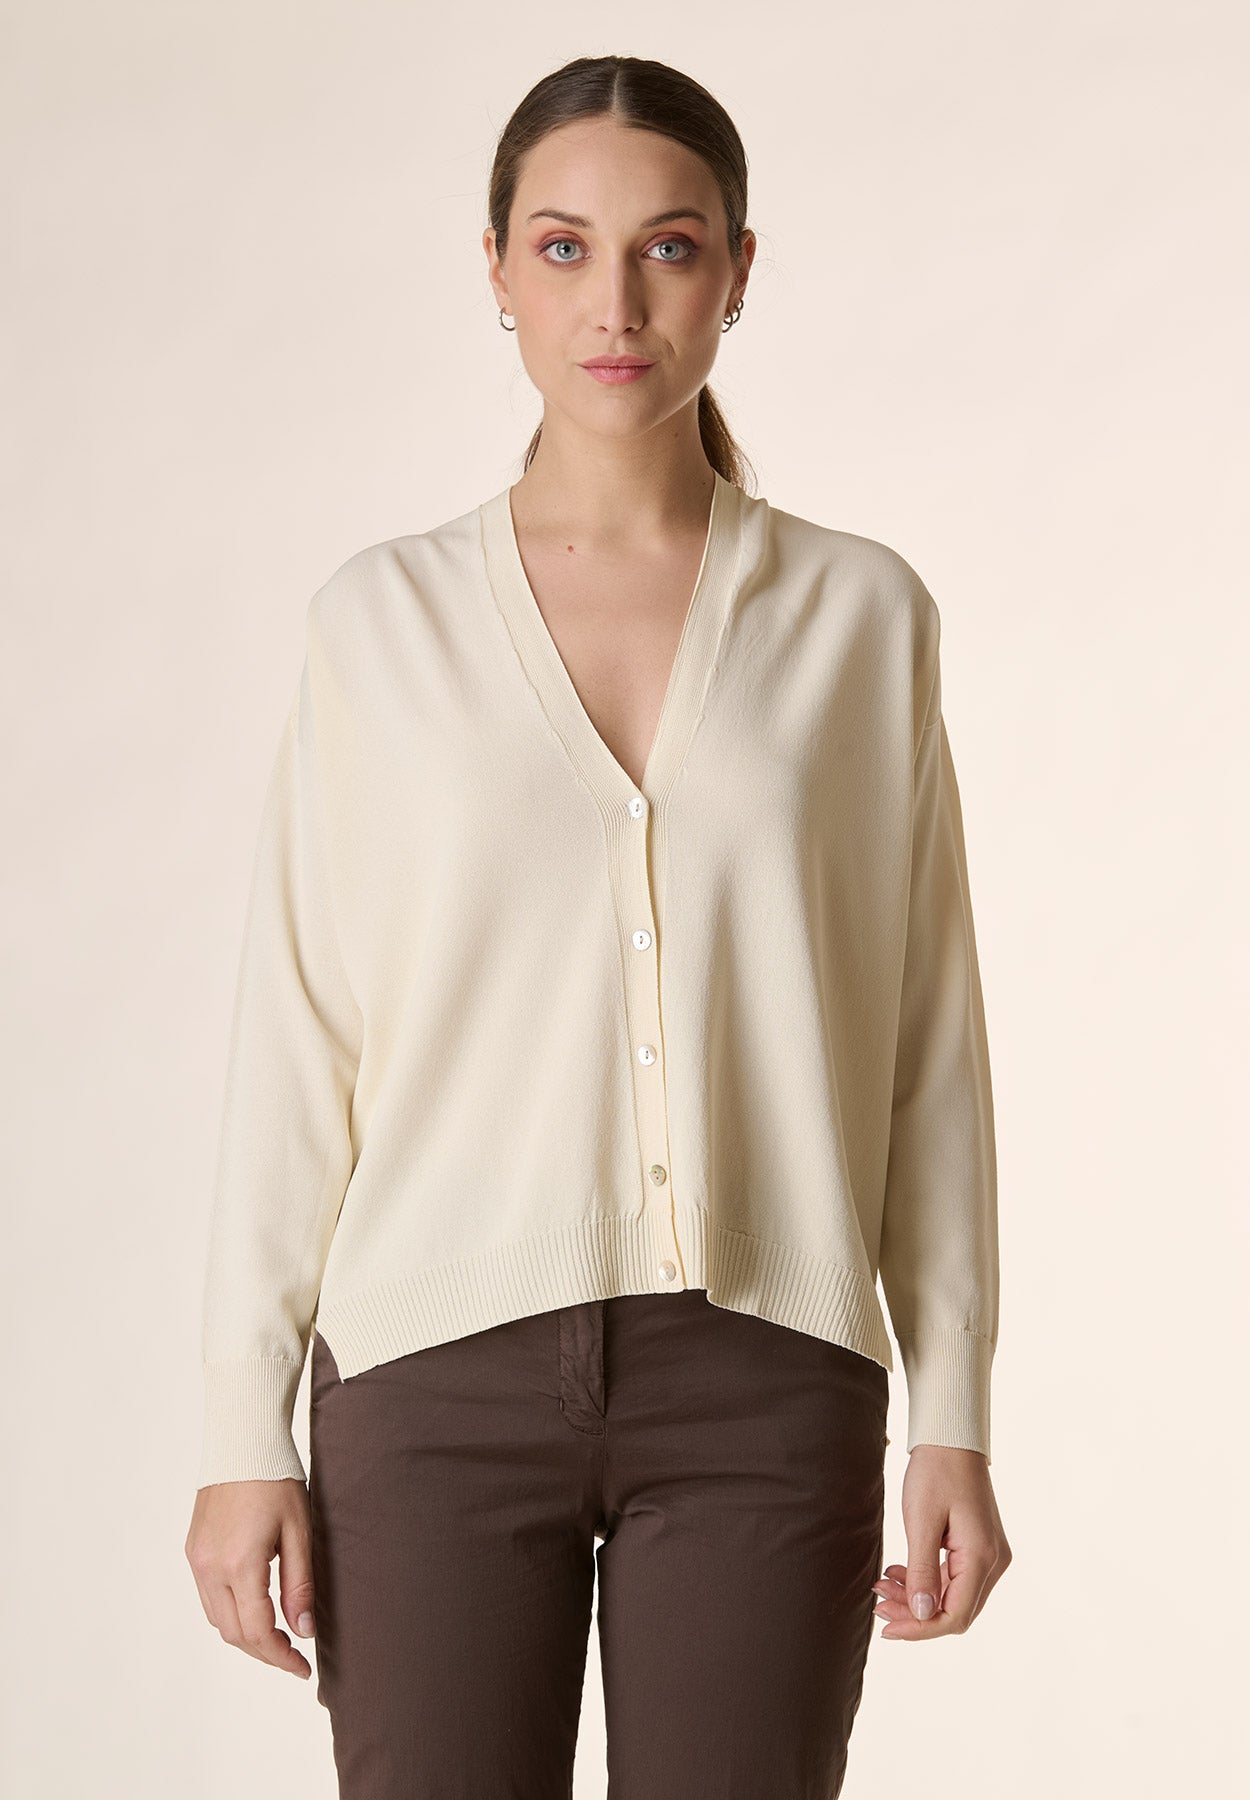 Cream cardigan with buttons